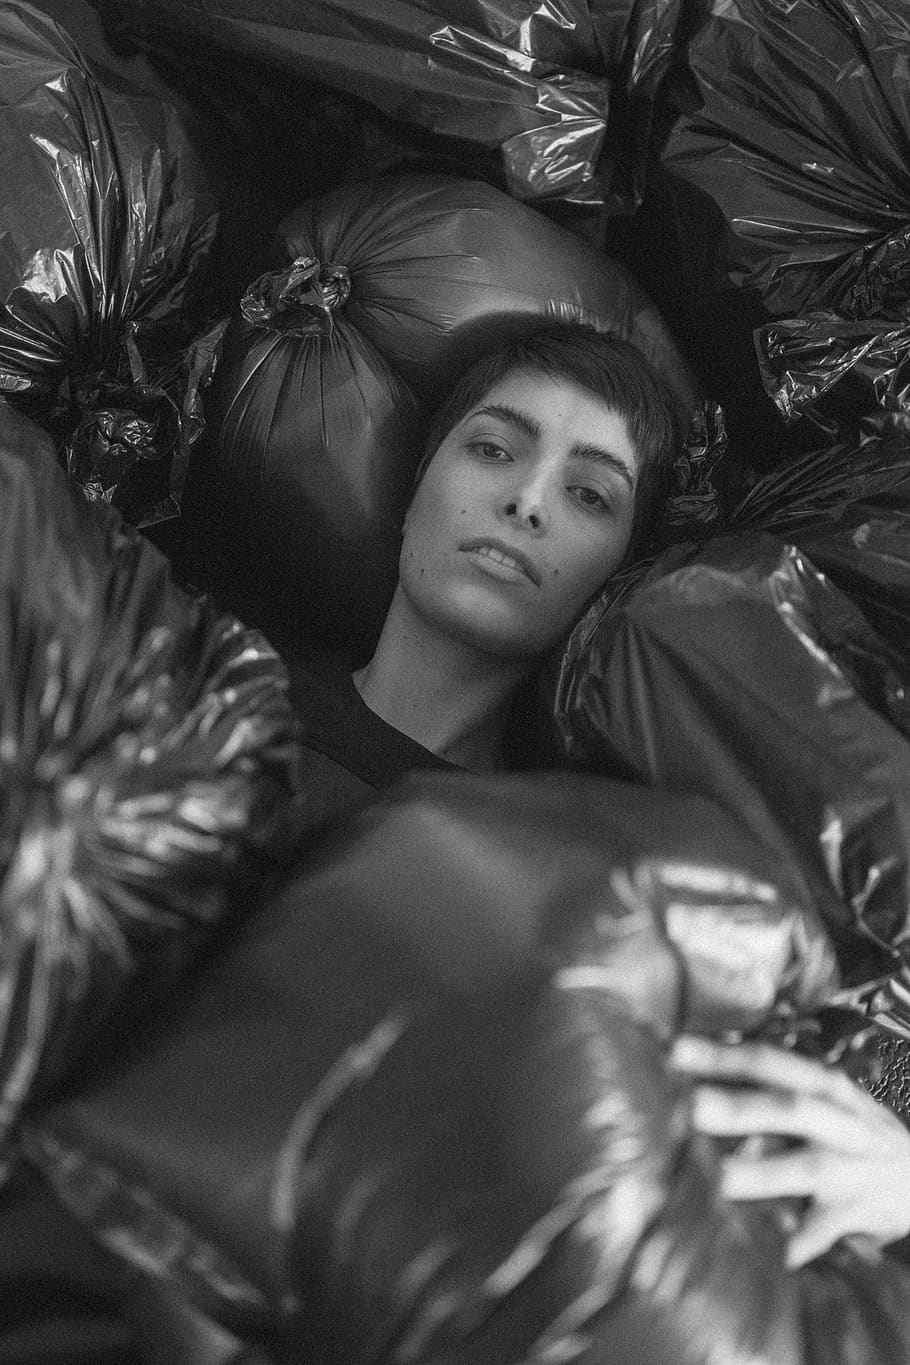 Grayscale Photo of Female Surrounded by Black Plastic Bags, adult